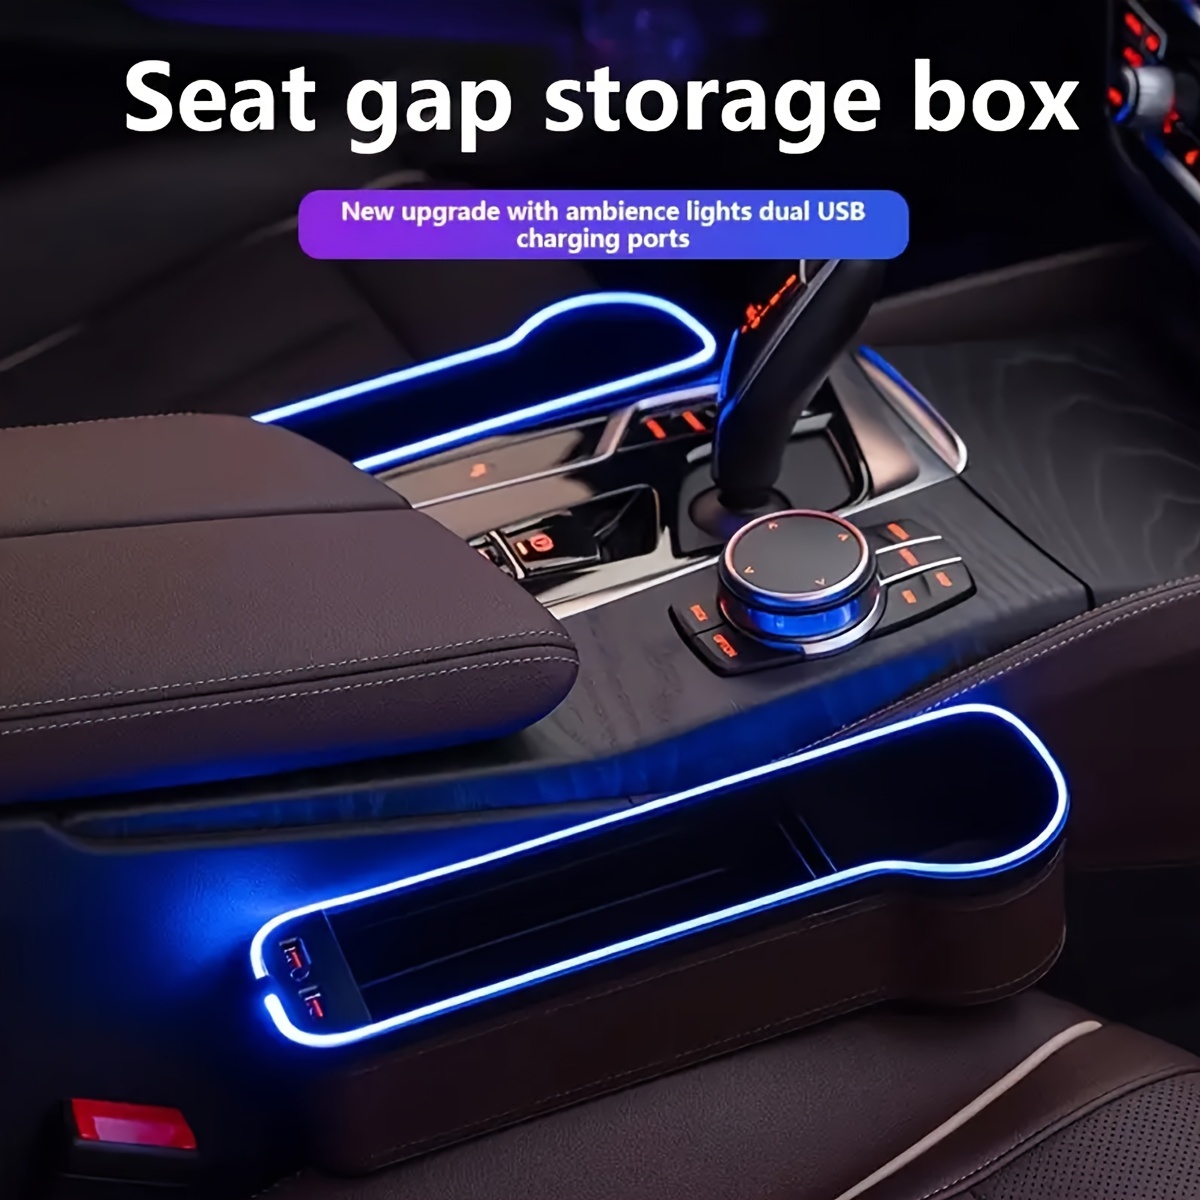 

Car Seat Gap Organizer With Led Ambient Lighting, Pu Leather Multifunctional Console Side Pocket With Dual Usb Charging Ports, Universal Fit Storage Box For Vehicle Interior Accessories